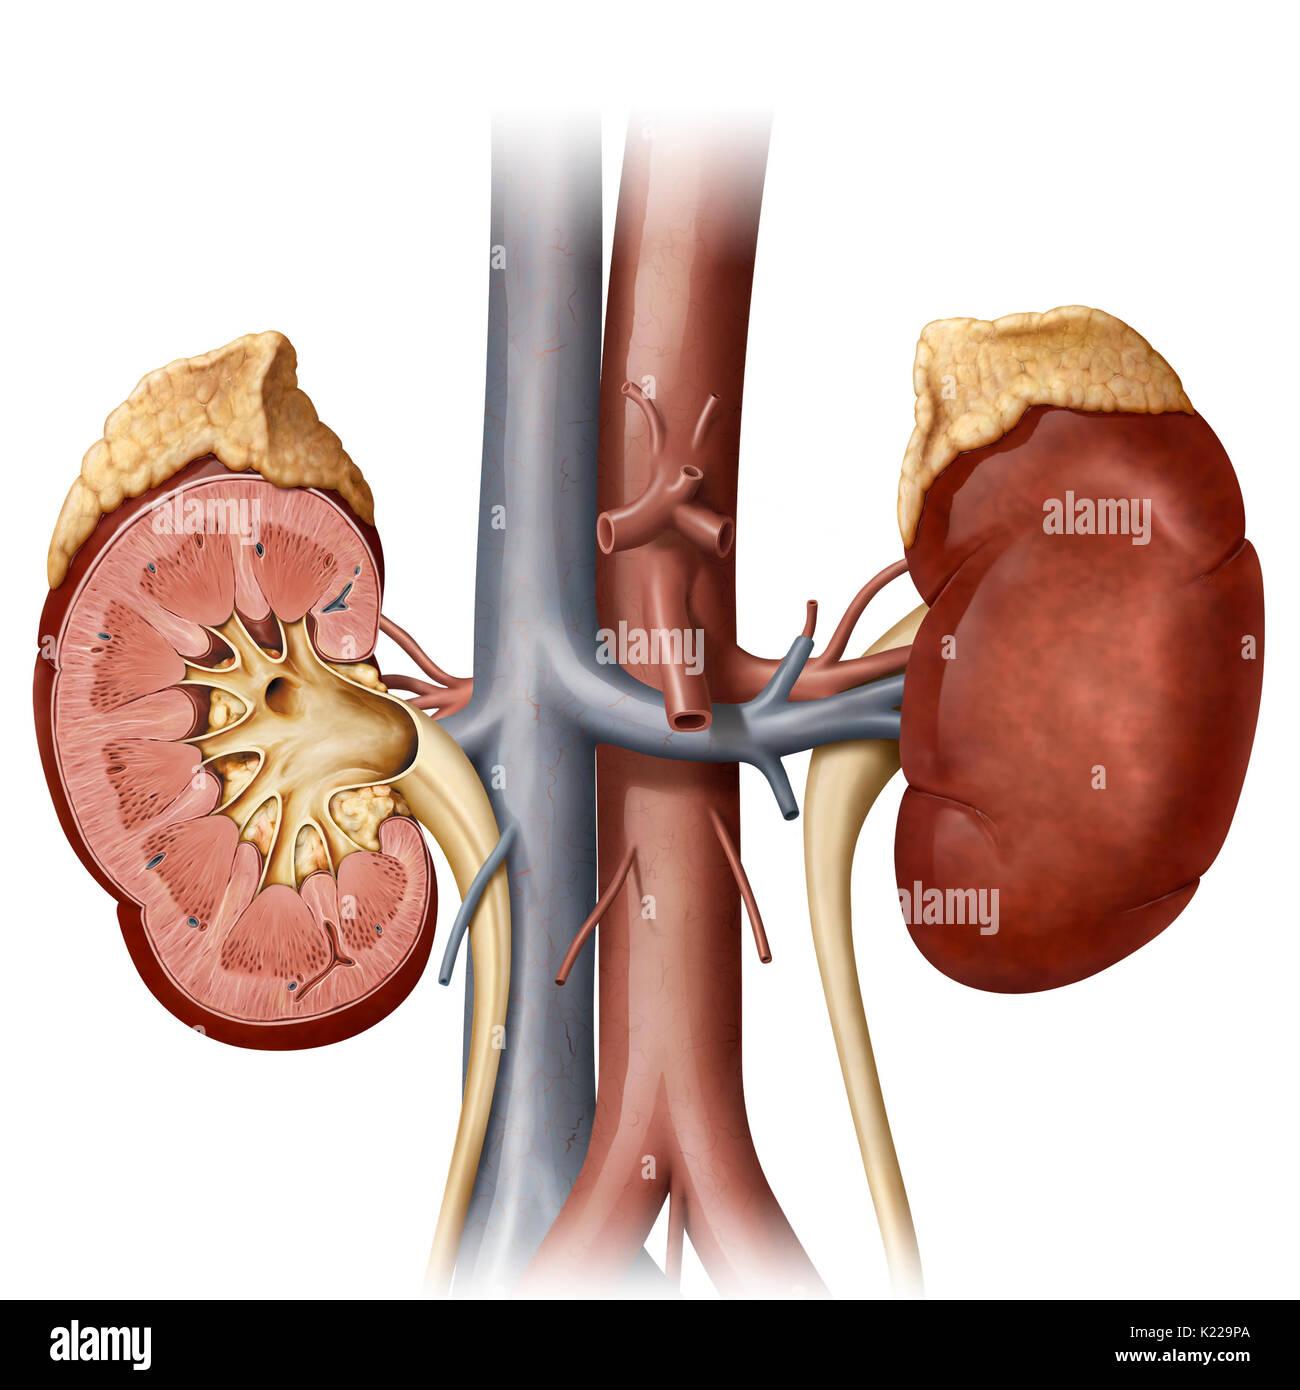 This image shows some organs of the urinary system; the adrenal gland, the kidneys, the ureter, the aorta and the inferior vena cava. Stock Photo